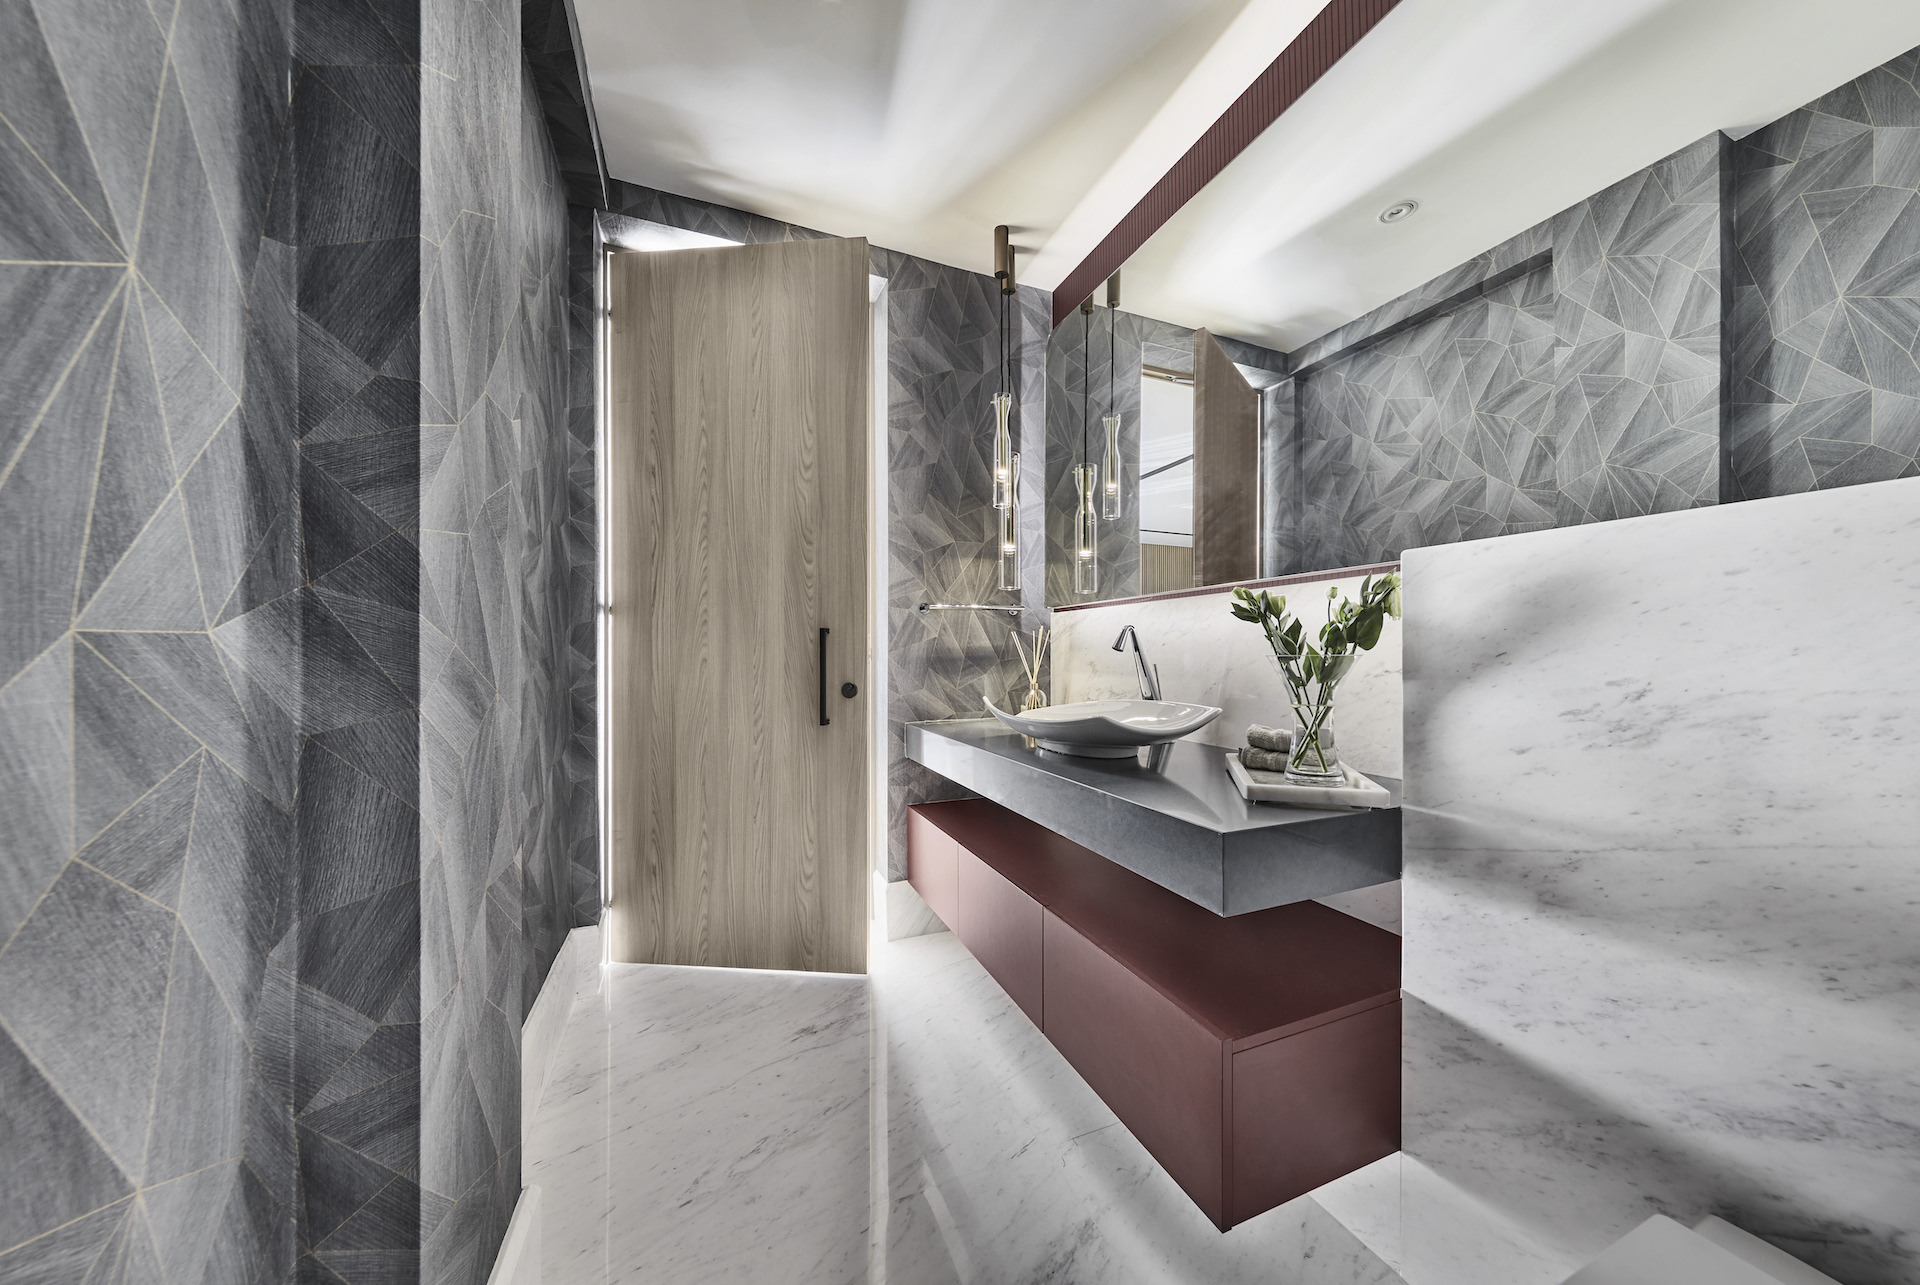 A bathroom with marble walls and a marble sink.